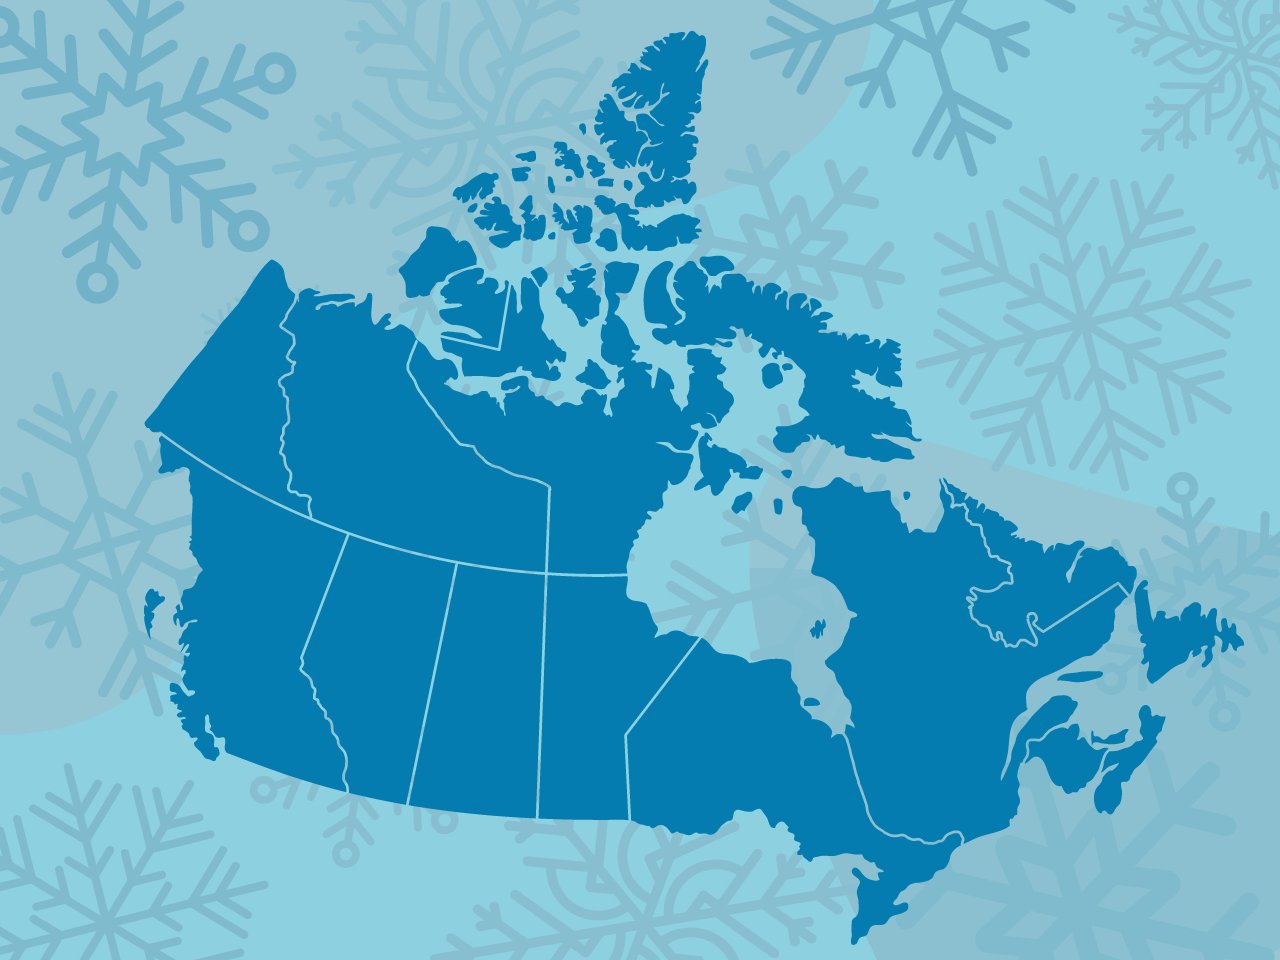 Illustration of map of canada on a blue background with big snowflakes for the article on winter weather